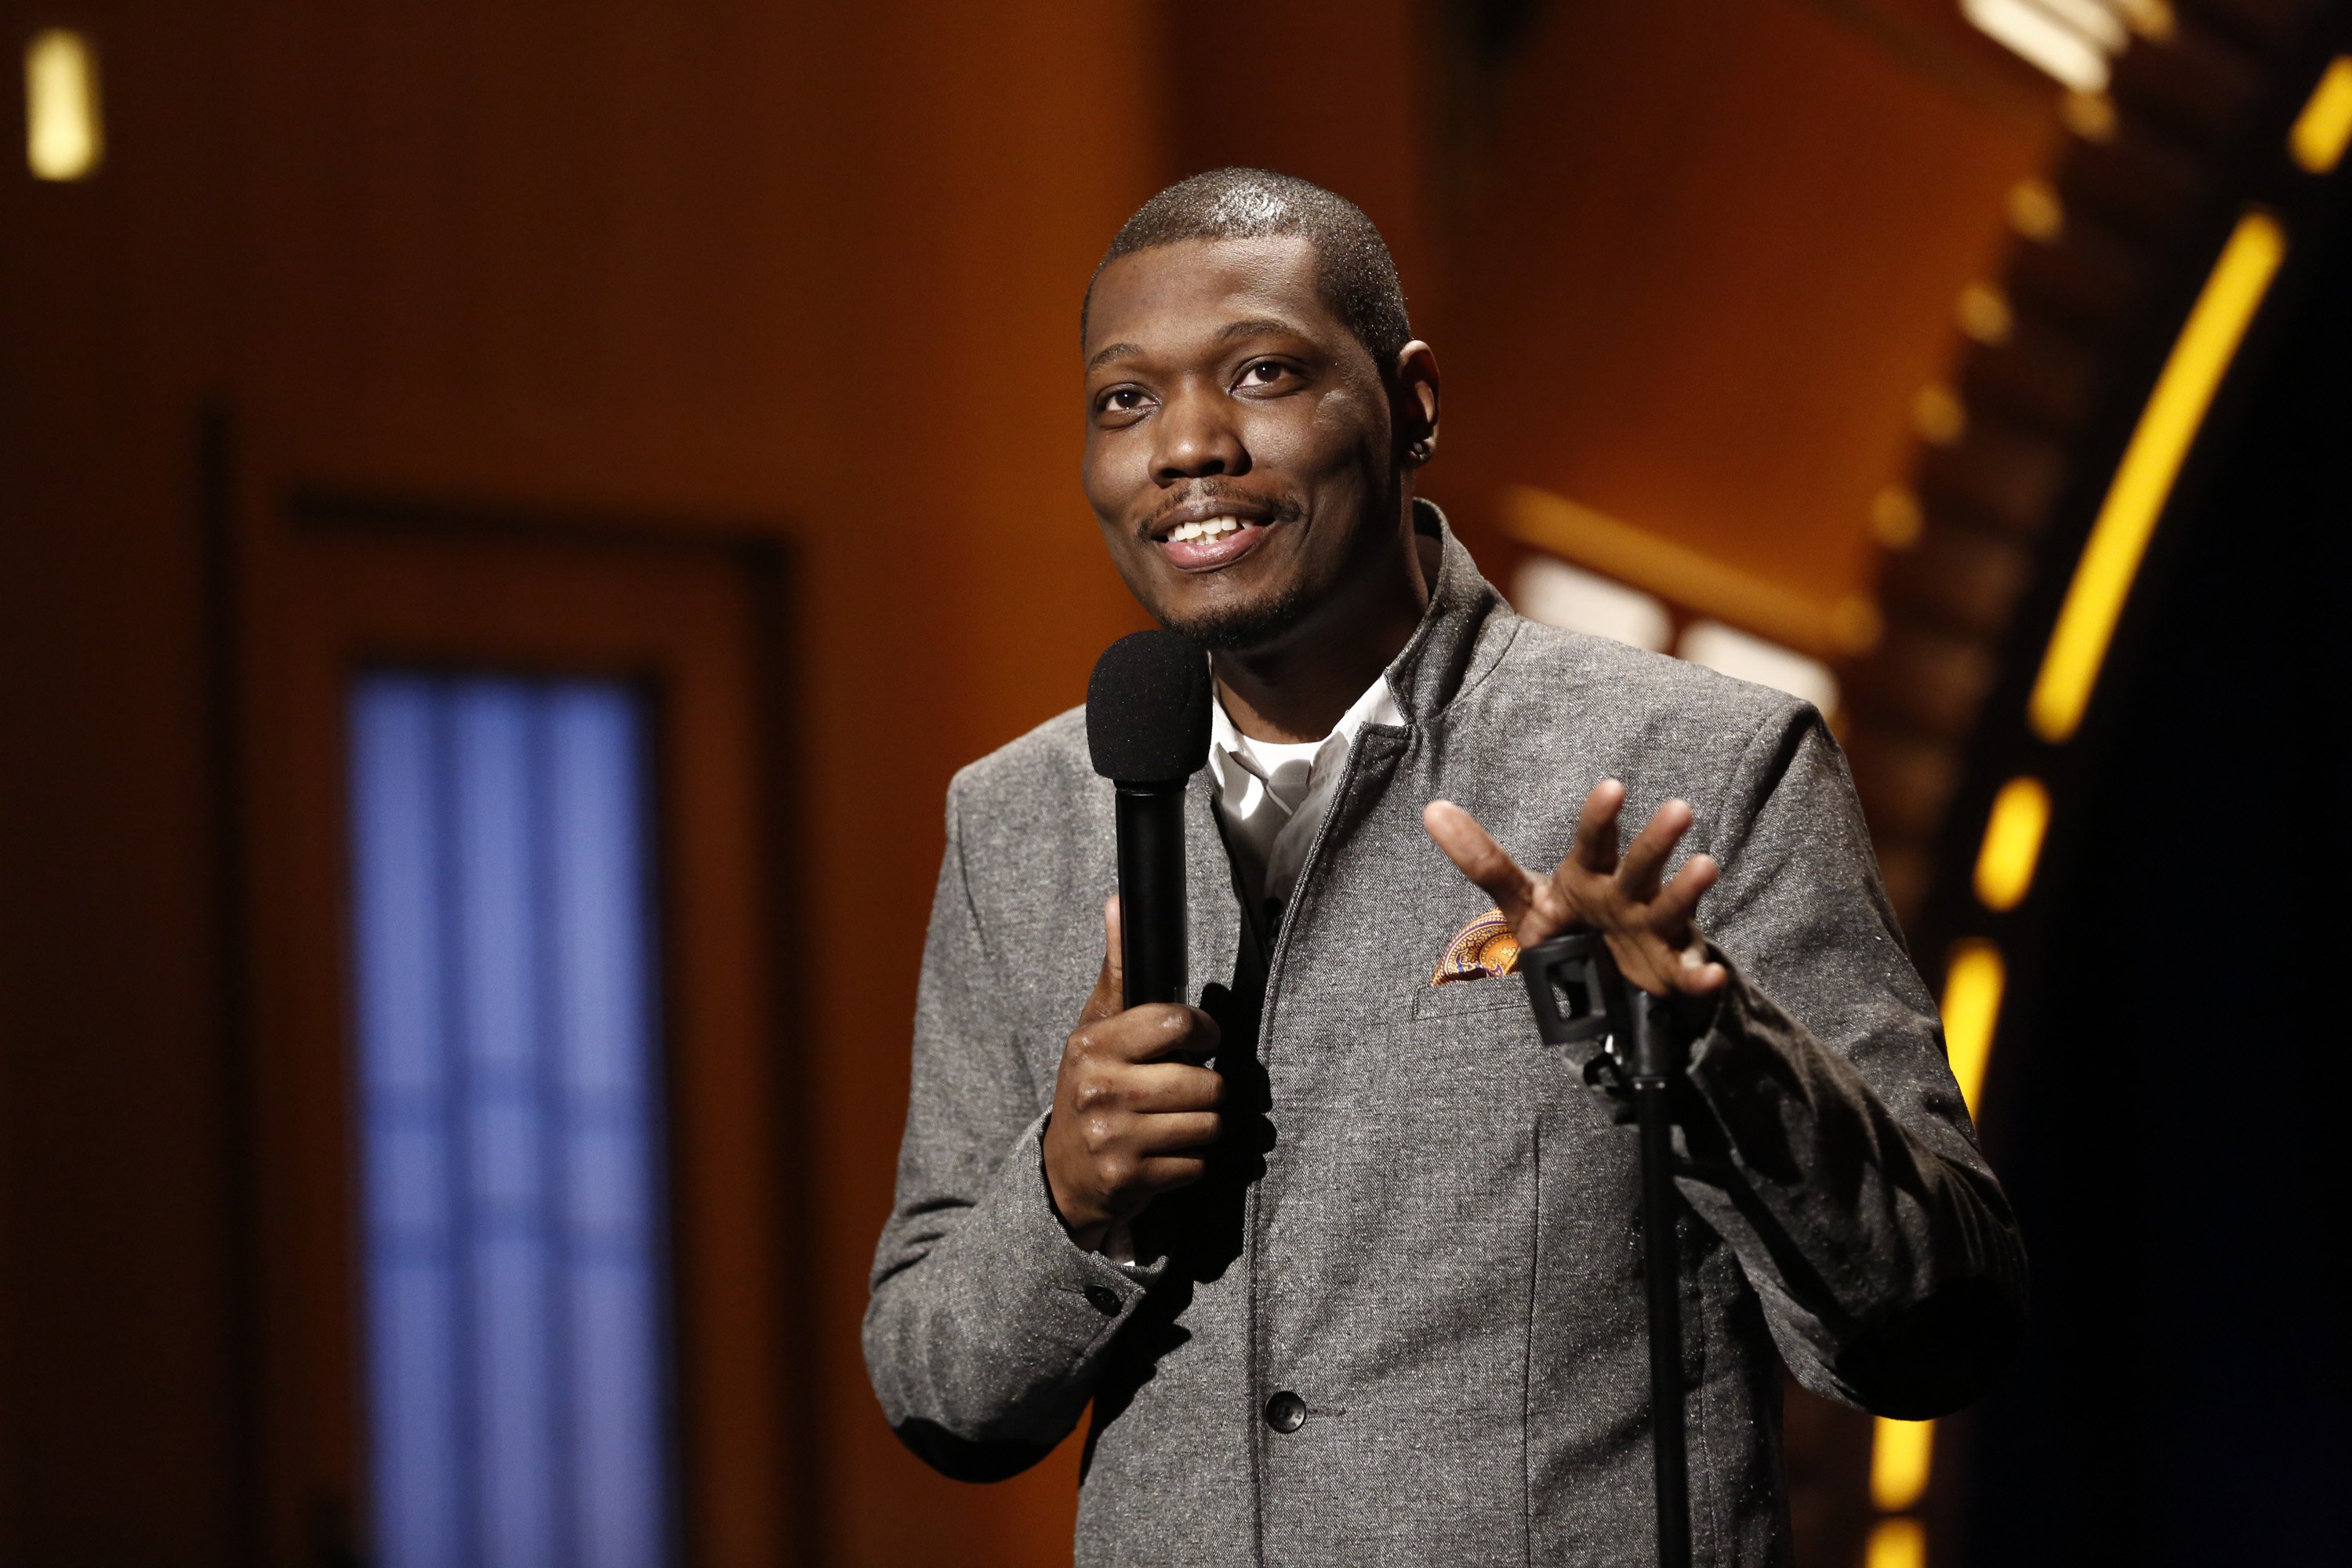 Comedian Michael Che performs on Feb. 28, 2014. (NBC/NBCU Photo Bank/Getty Images)